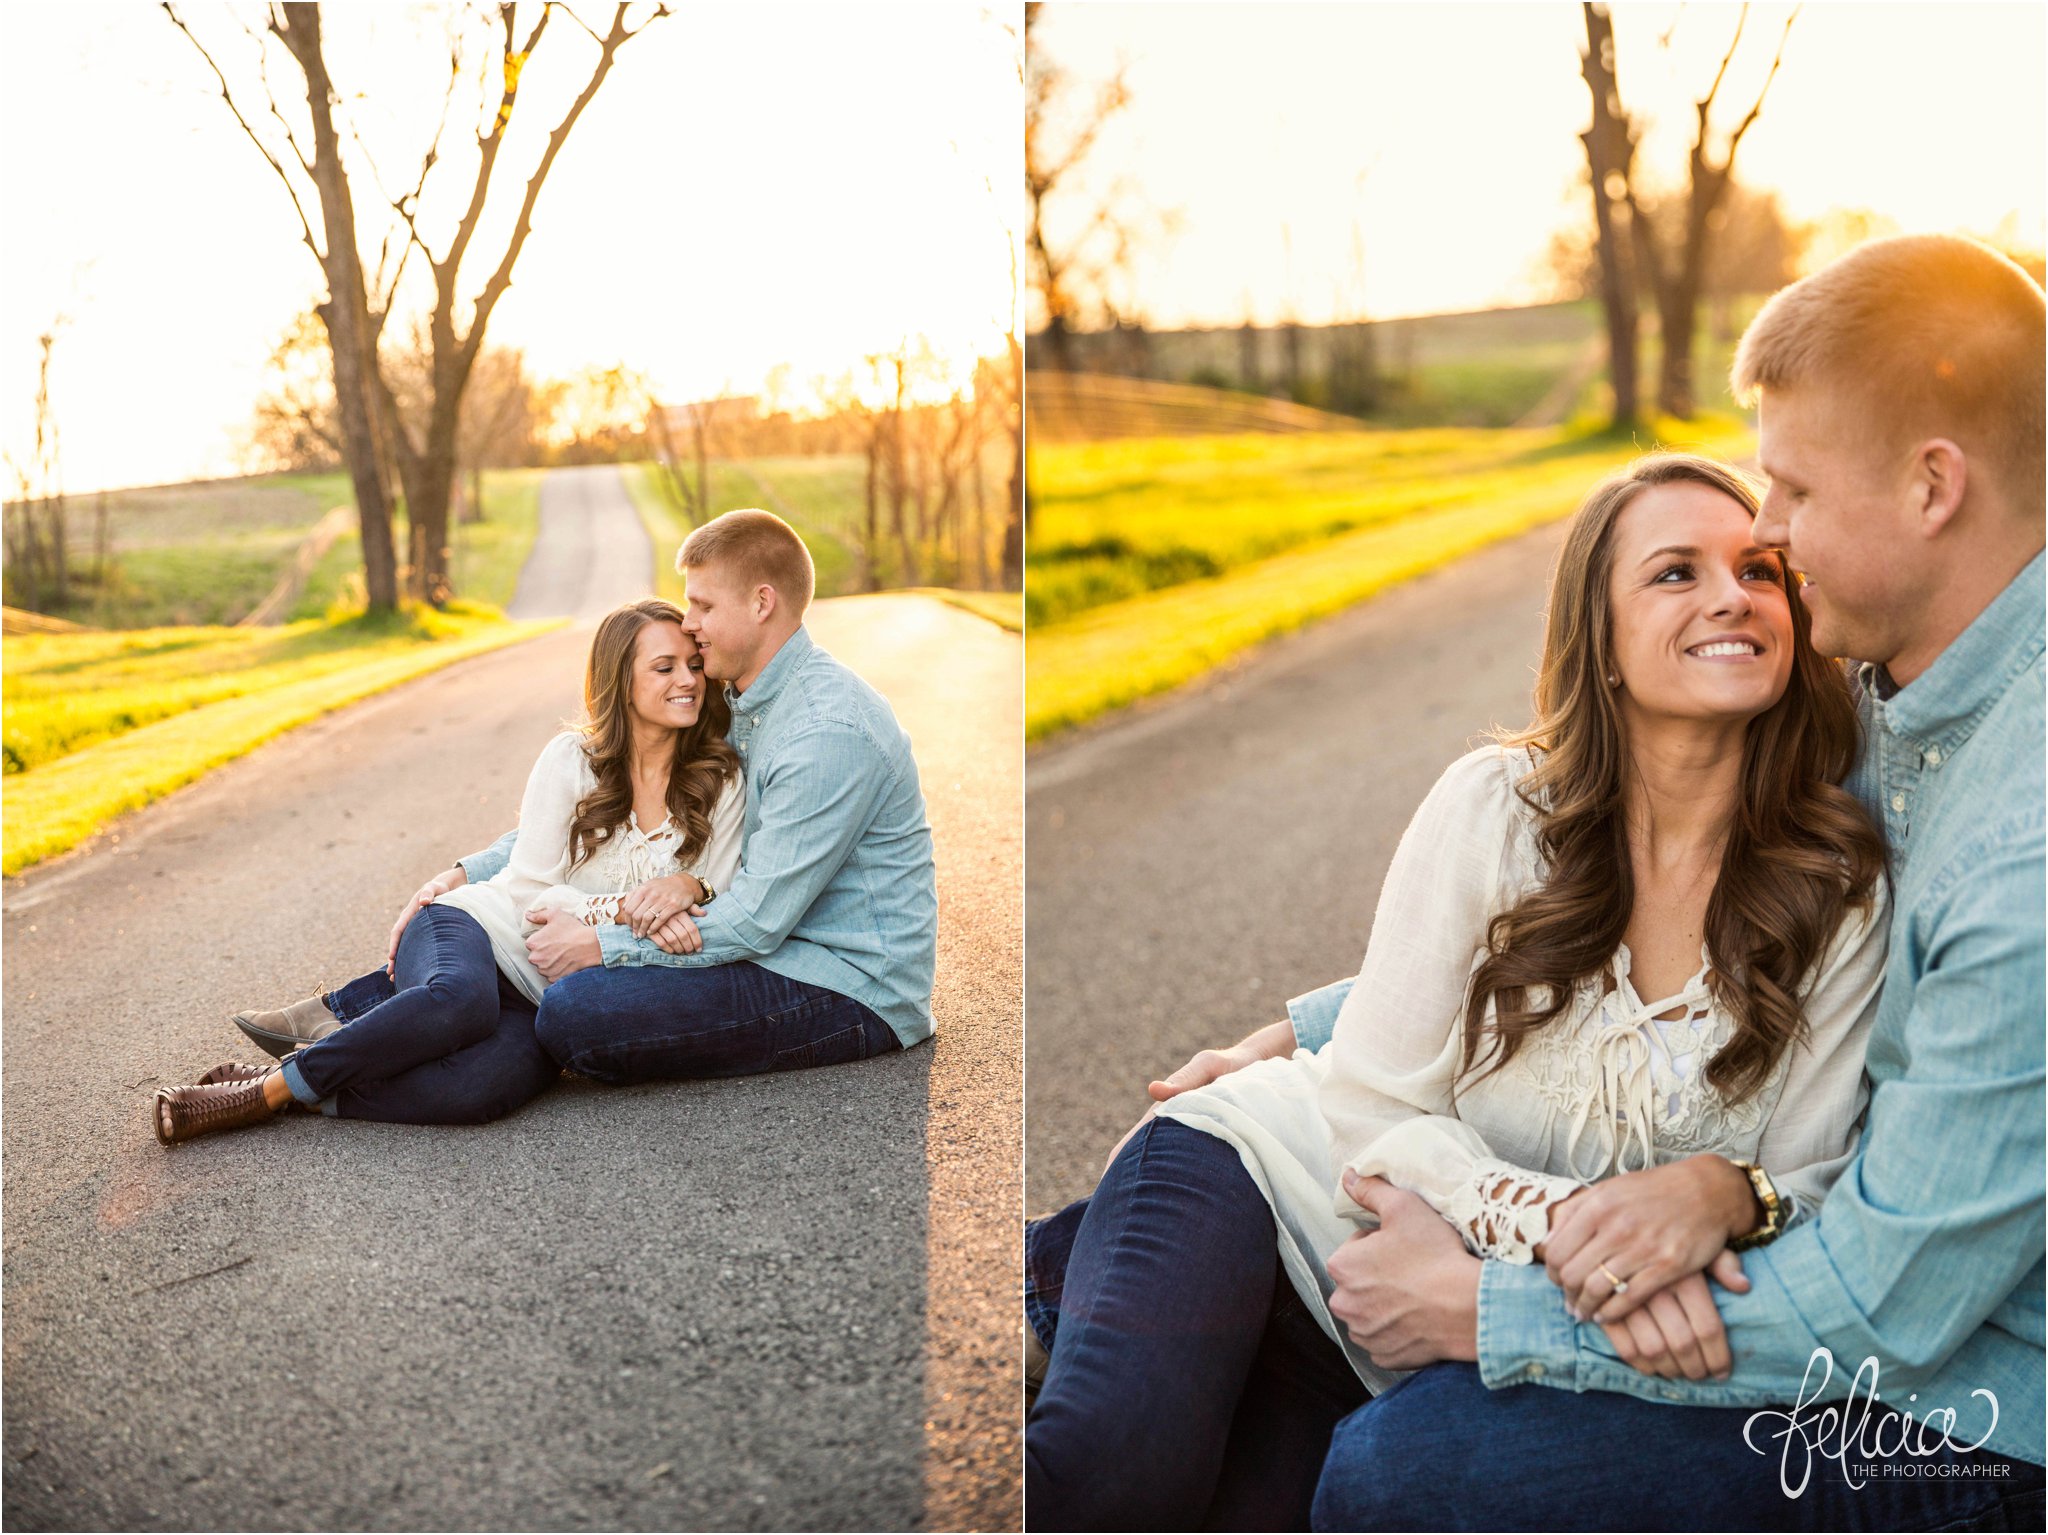 Romantic Engagement | Kansas City, MO | Seated Country Road Pose | Images by www.feliciathephotographer.com